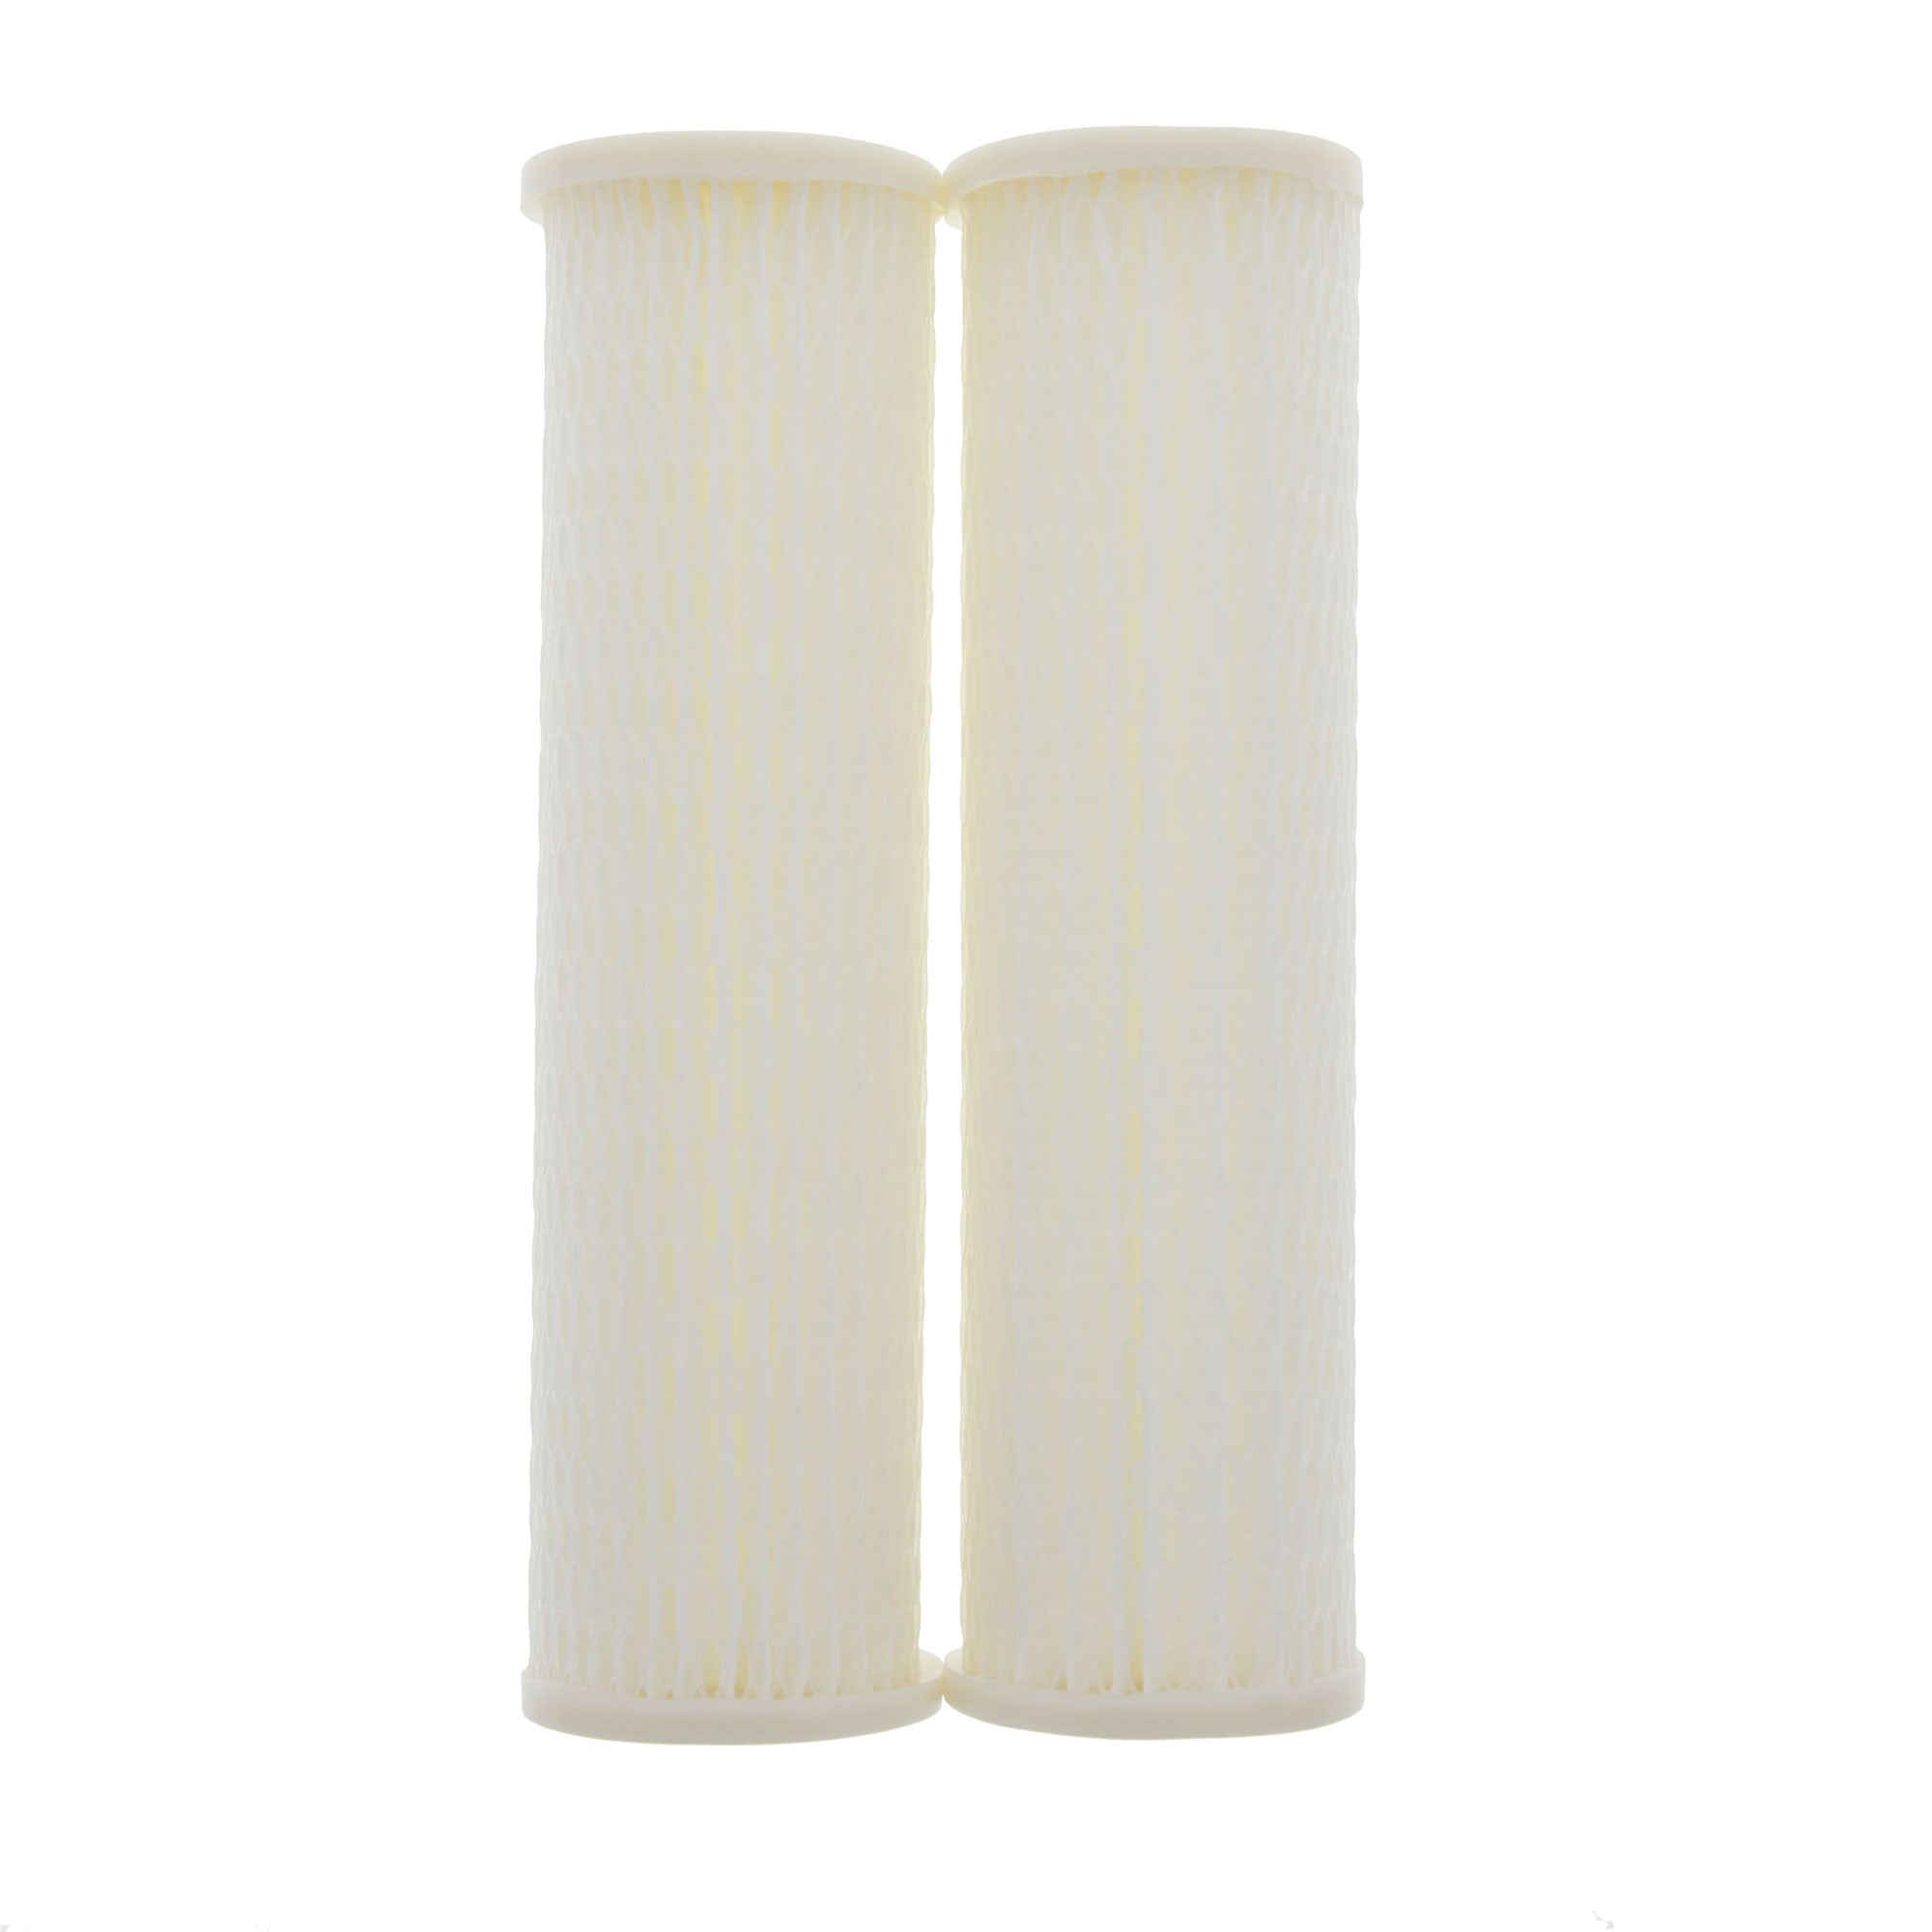 S1A Culligan Level 2 Whole House Filter Replacement Cartridge (2-Pack)